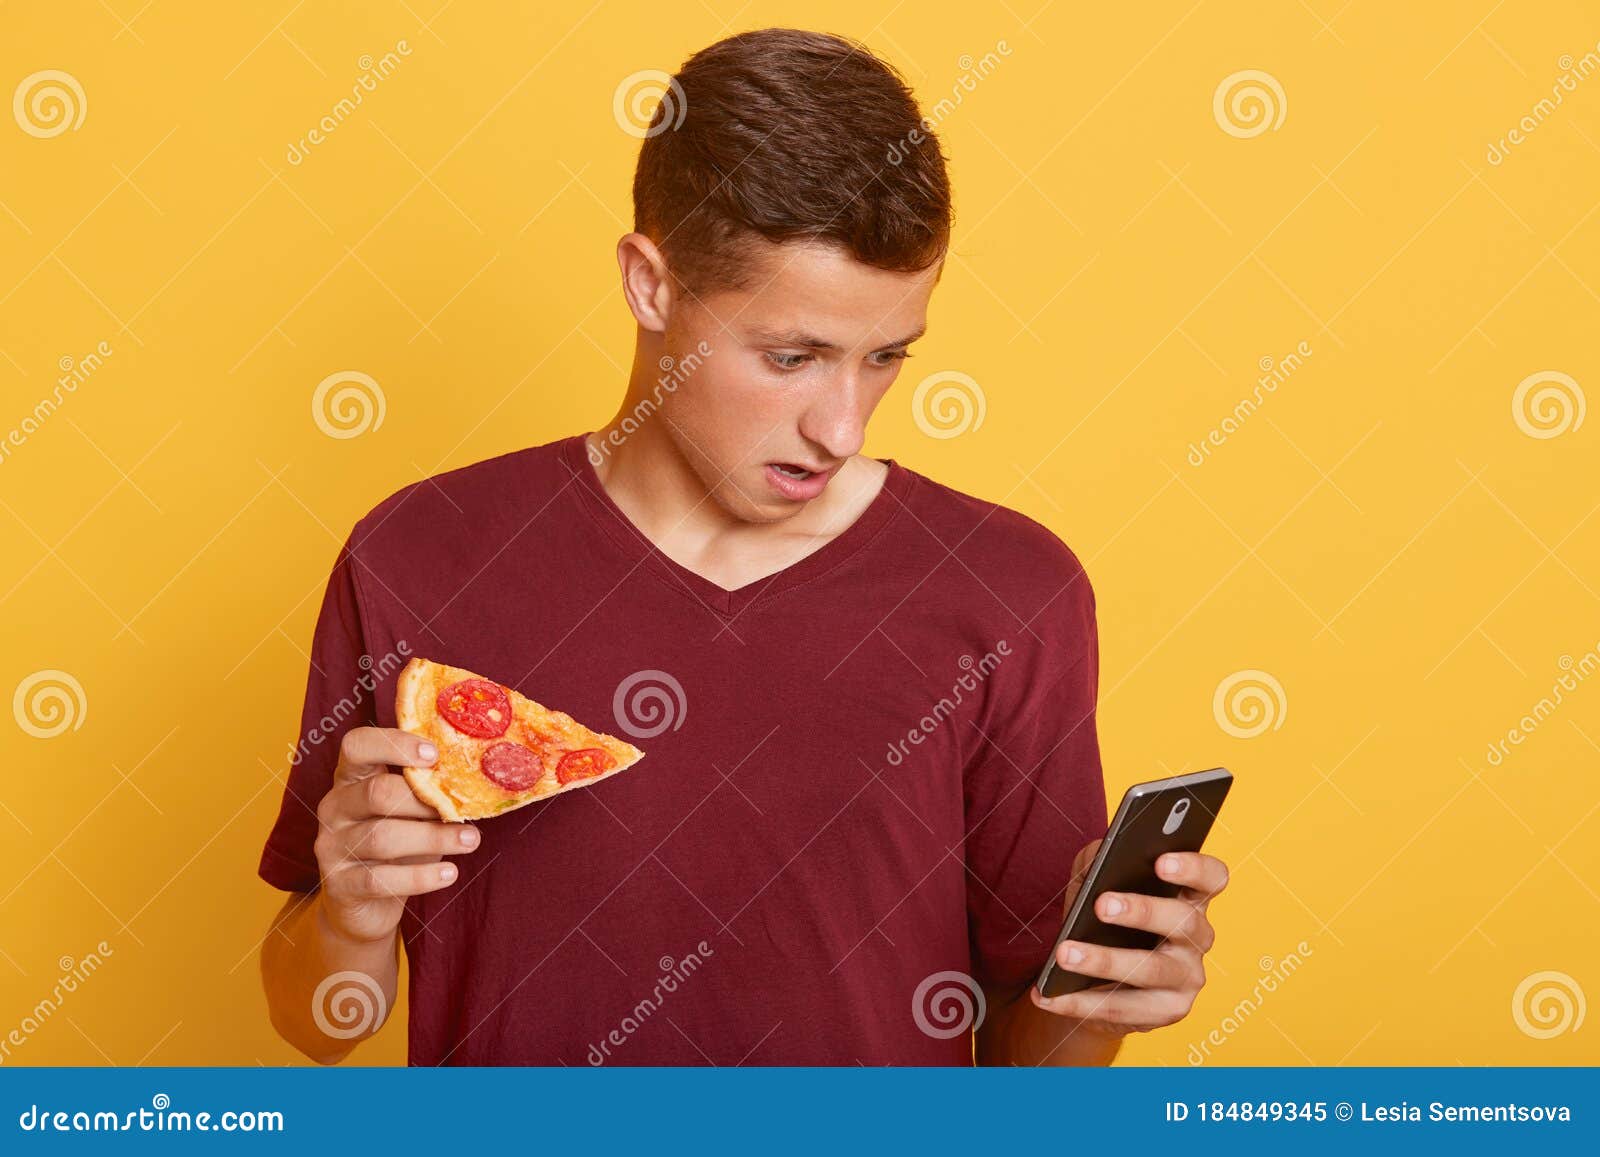 handsome astonish guy holding slice of tasty pizza and phone, checking social network while having snack, sees braking news,